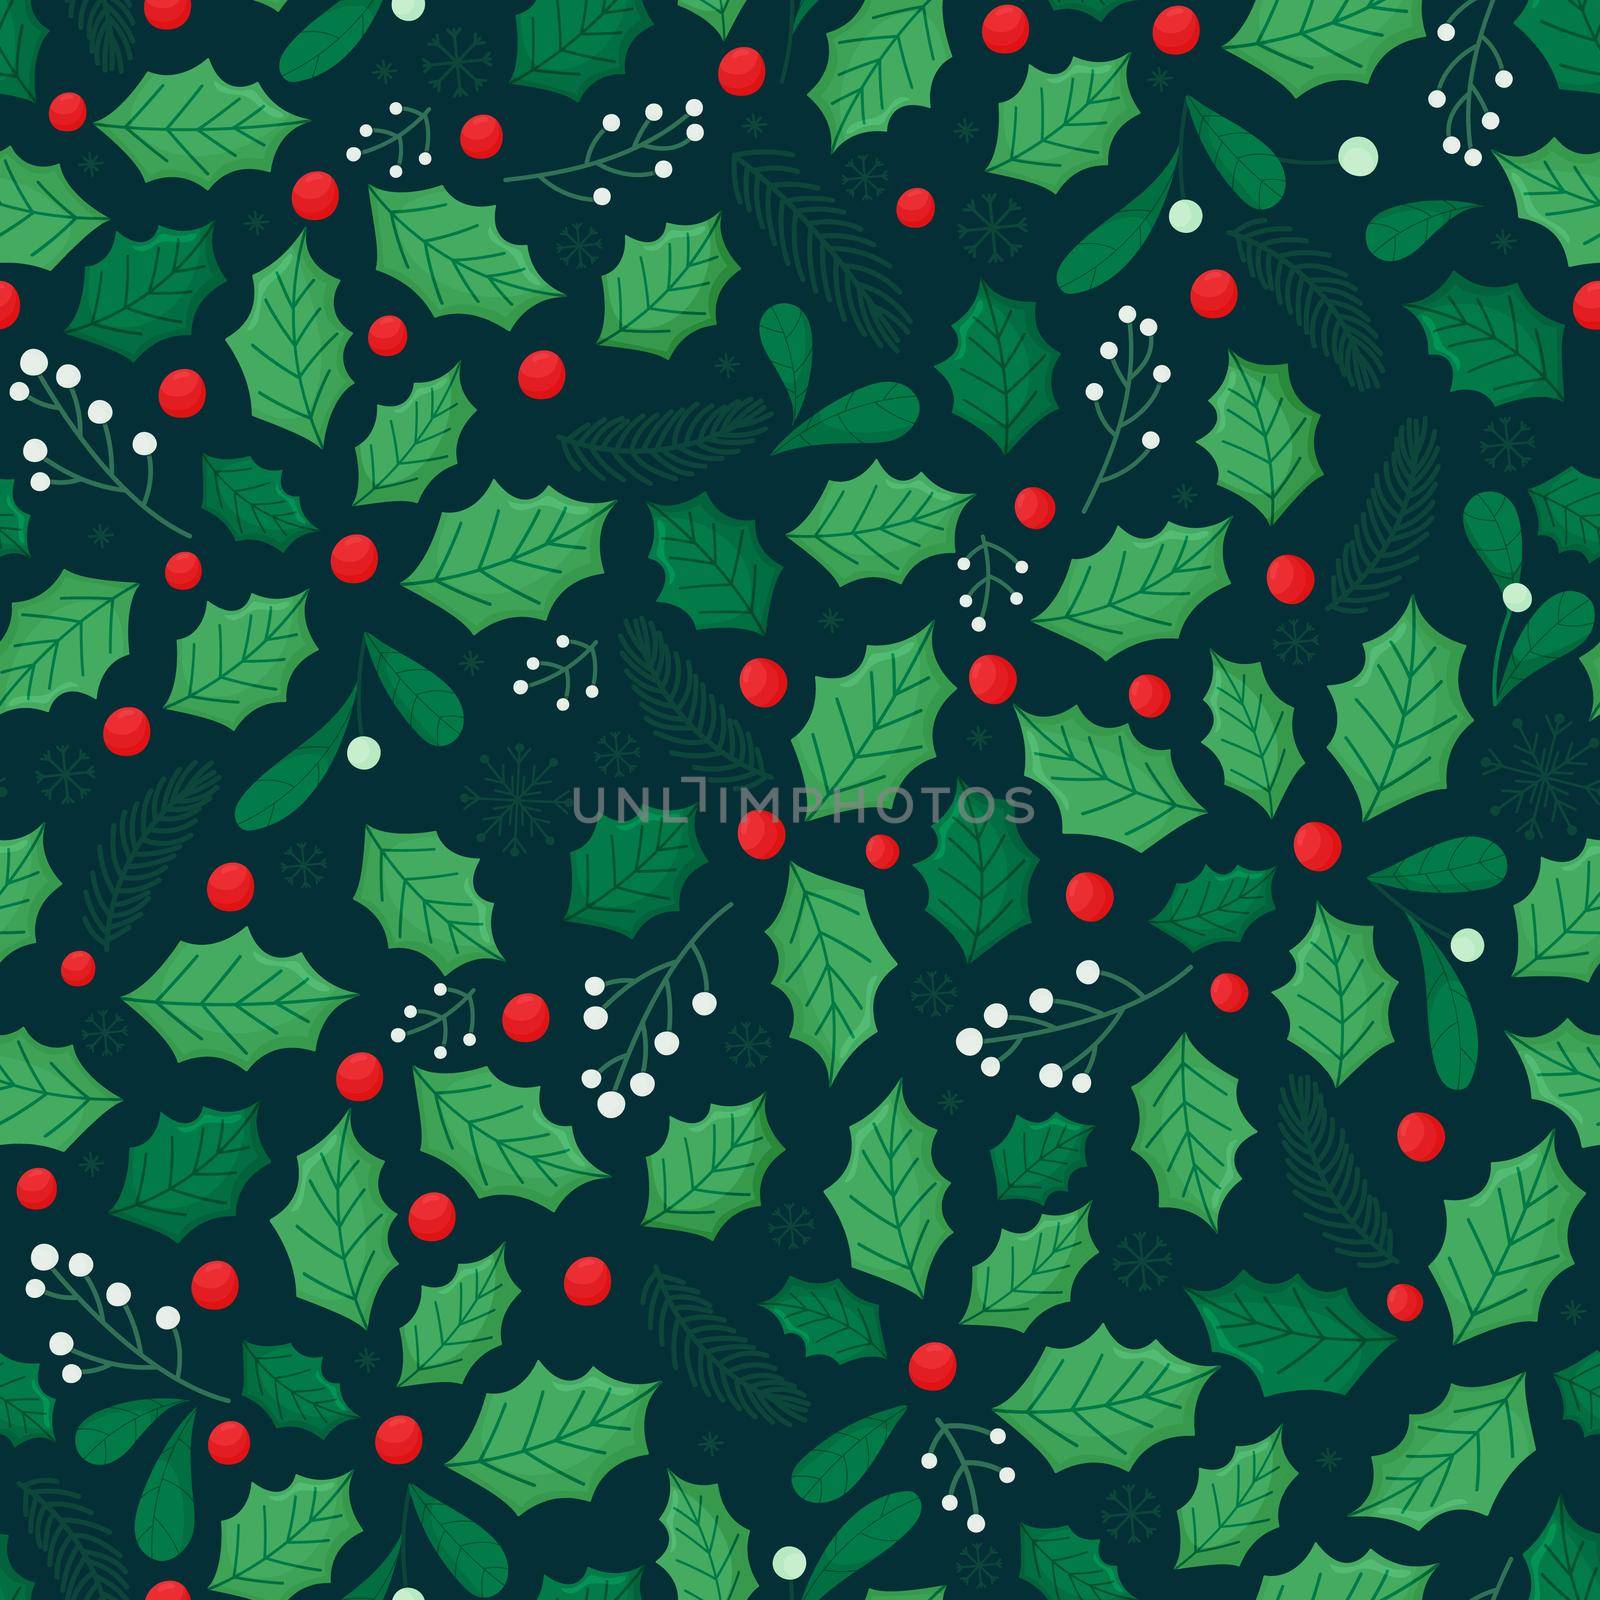 Seamless Christmas pattern with holly leaves, fir branches, green leaves and berries on a dark green background. by Lena_Khmelniuk